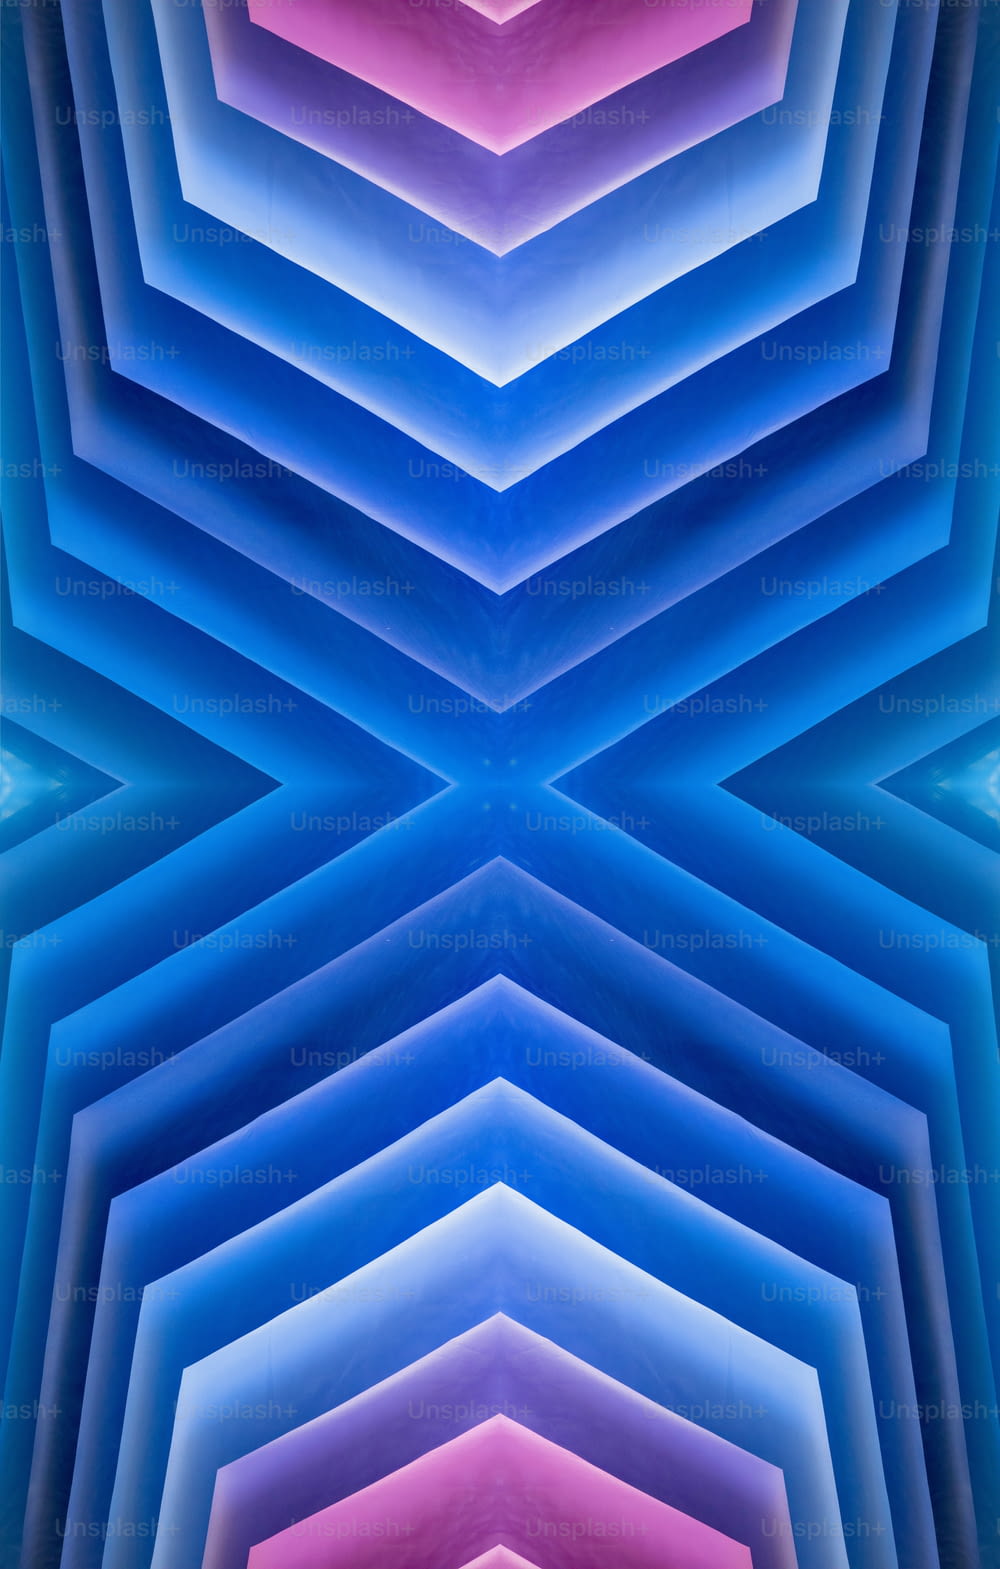 an abstract image of blue, pink, and purple shapes